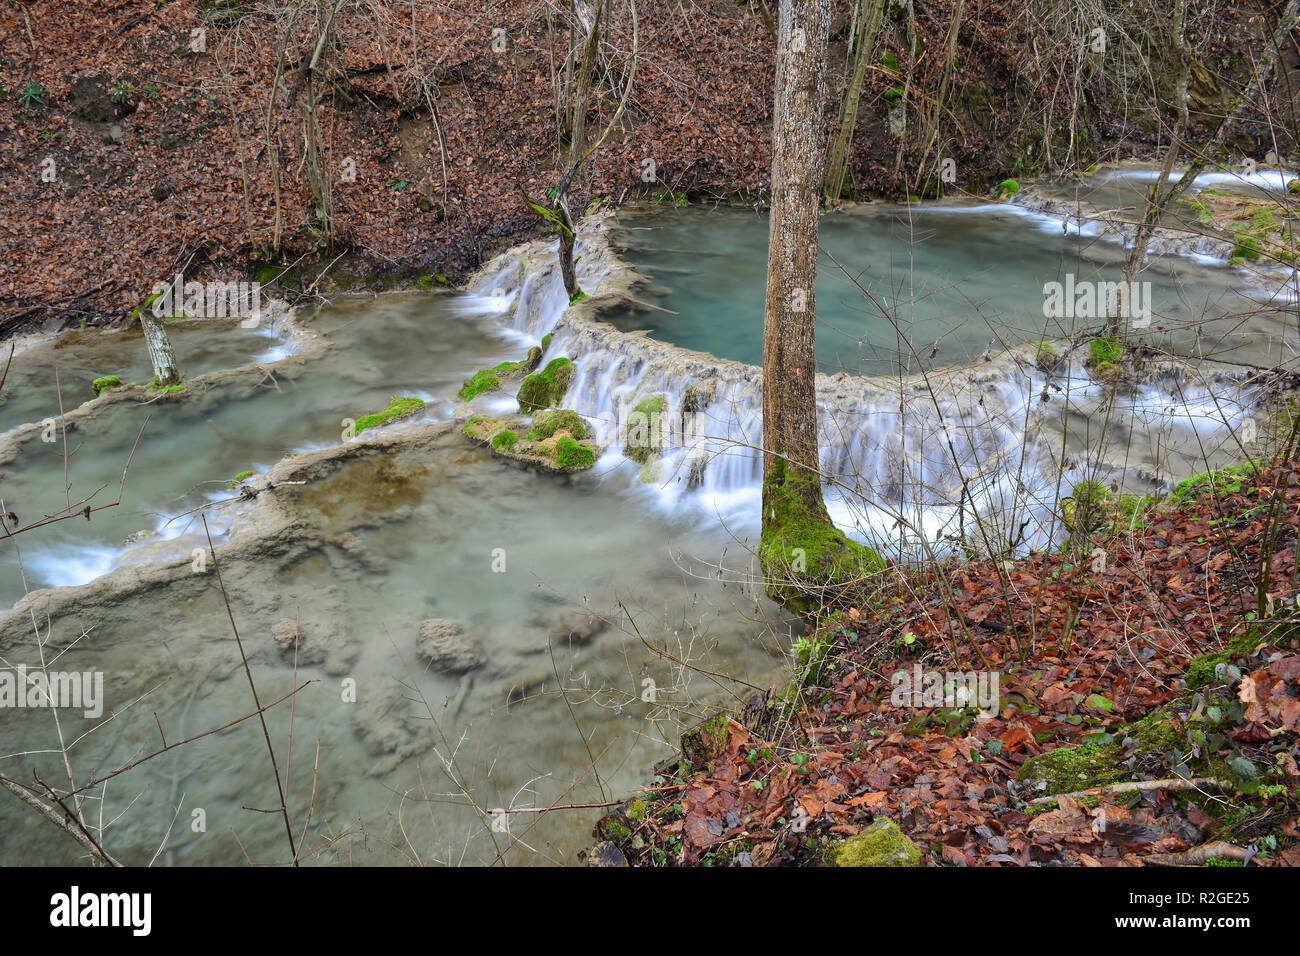 One single round bigar pond and waterfall formed by bigar limestone sedimentation, clear turquoise water, a few stones and trees covered by green moss Stock Photo